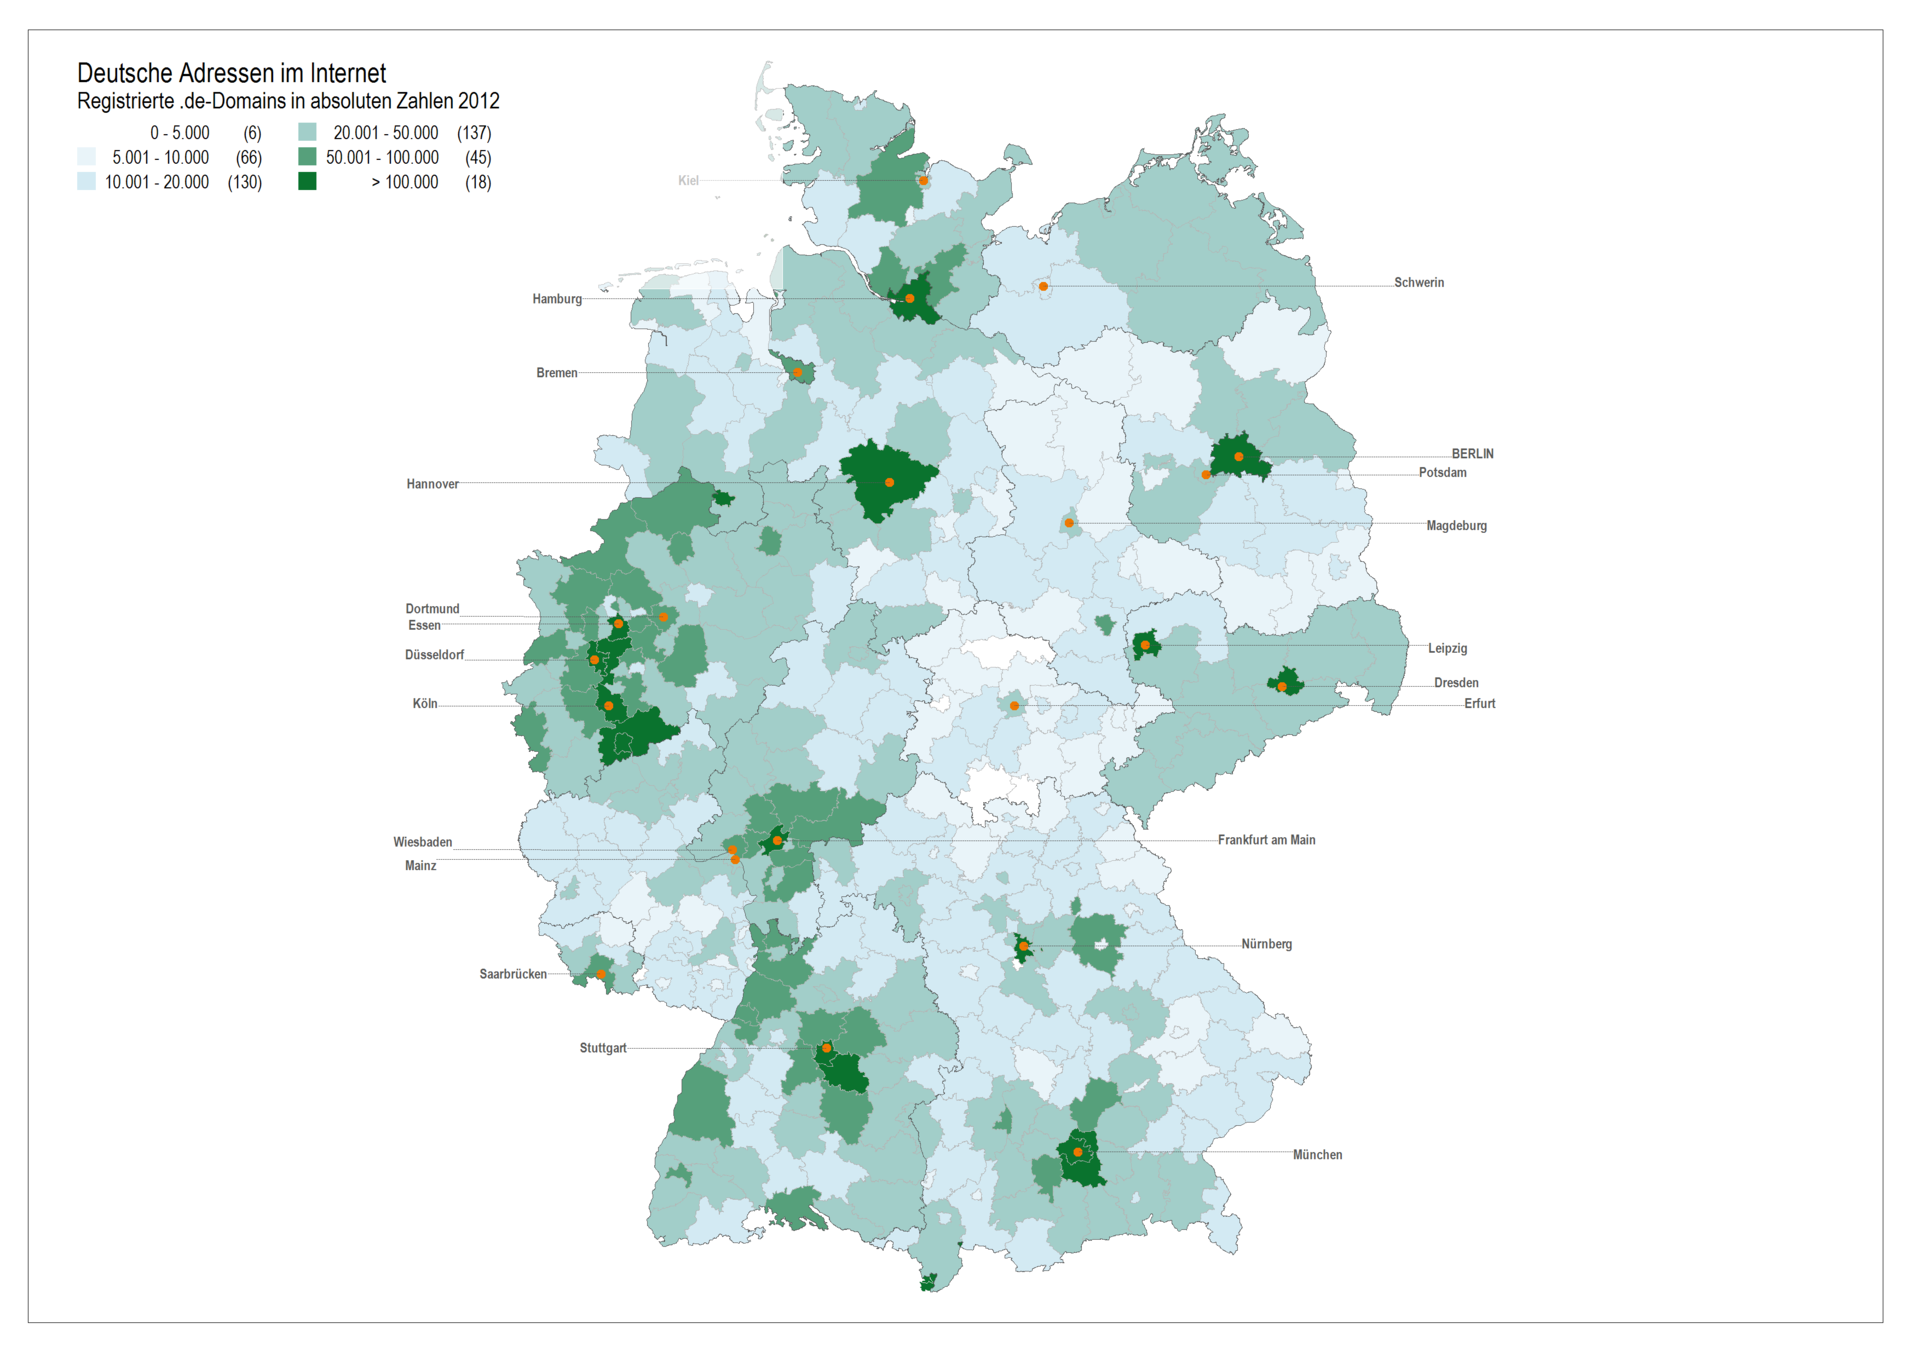 Absolute Number of .de Domains in Cities and Districts in Germany in 2012